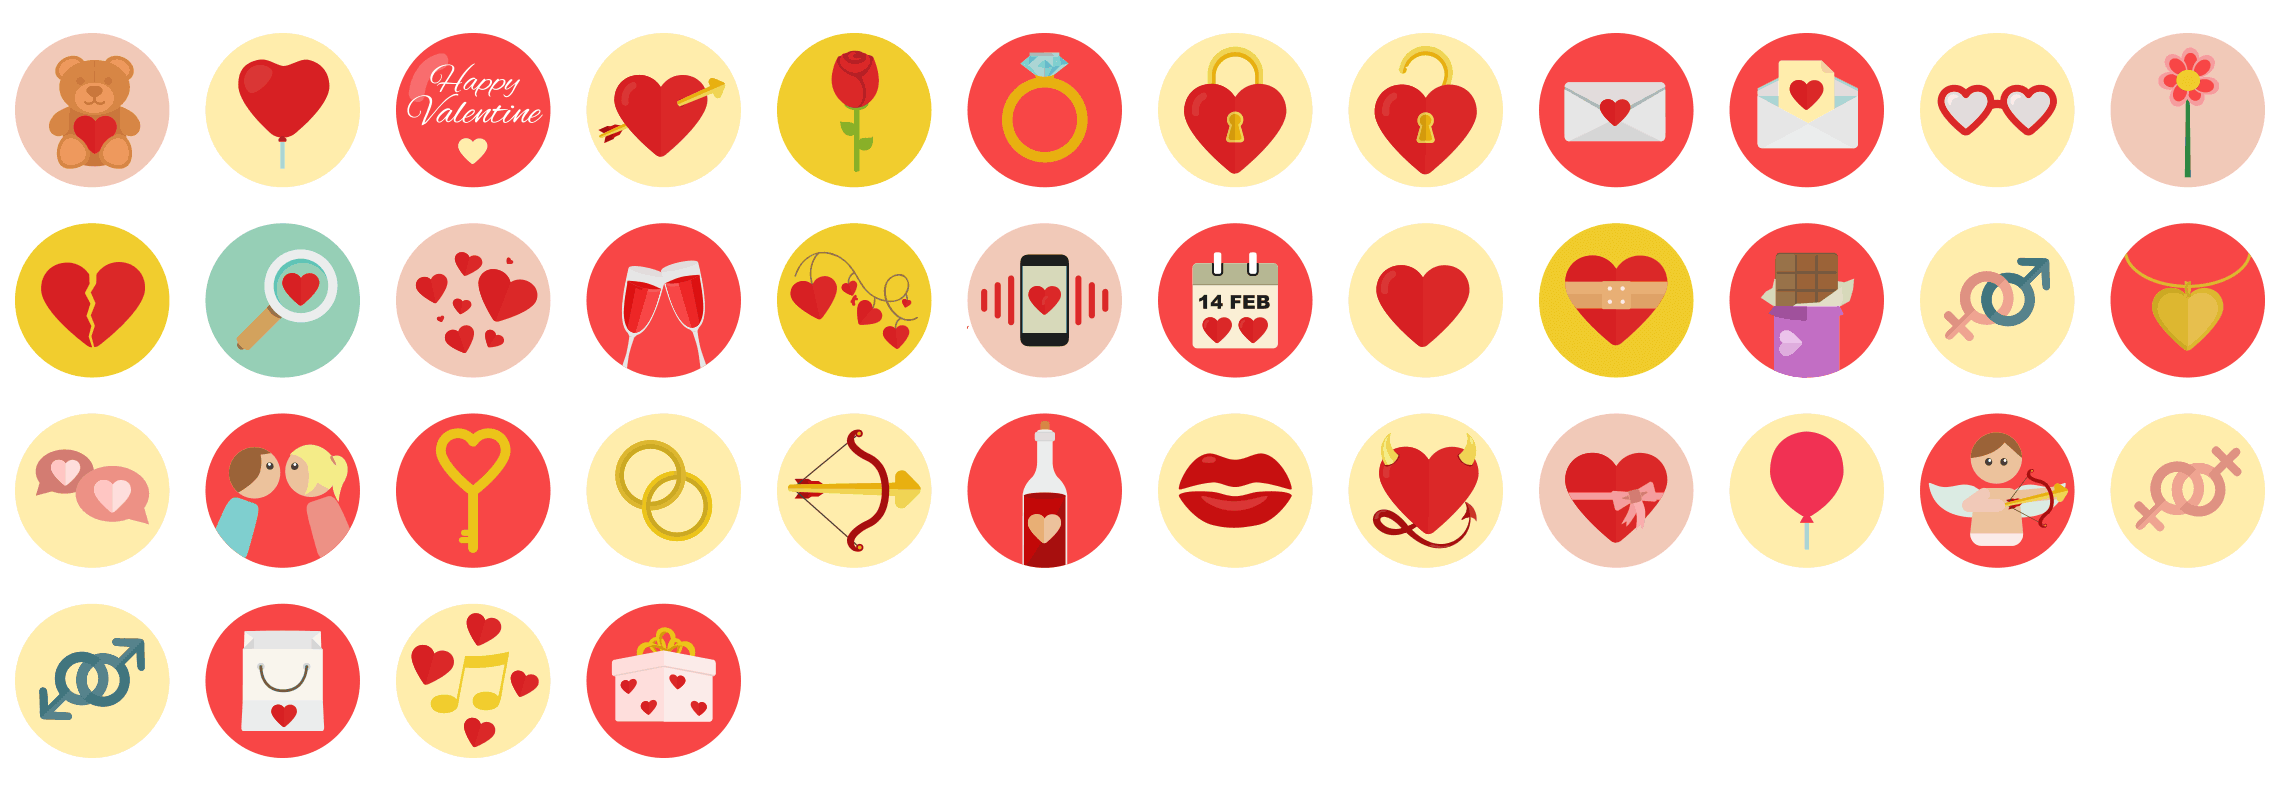 valentines-day-flat-icons-vol-1-preview